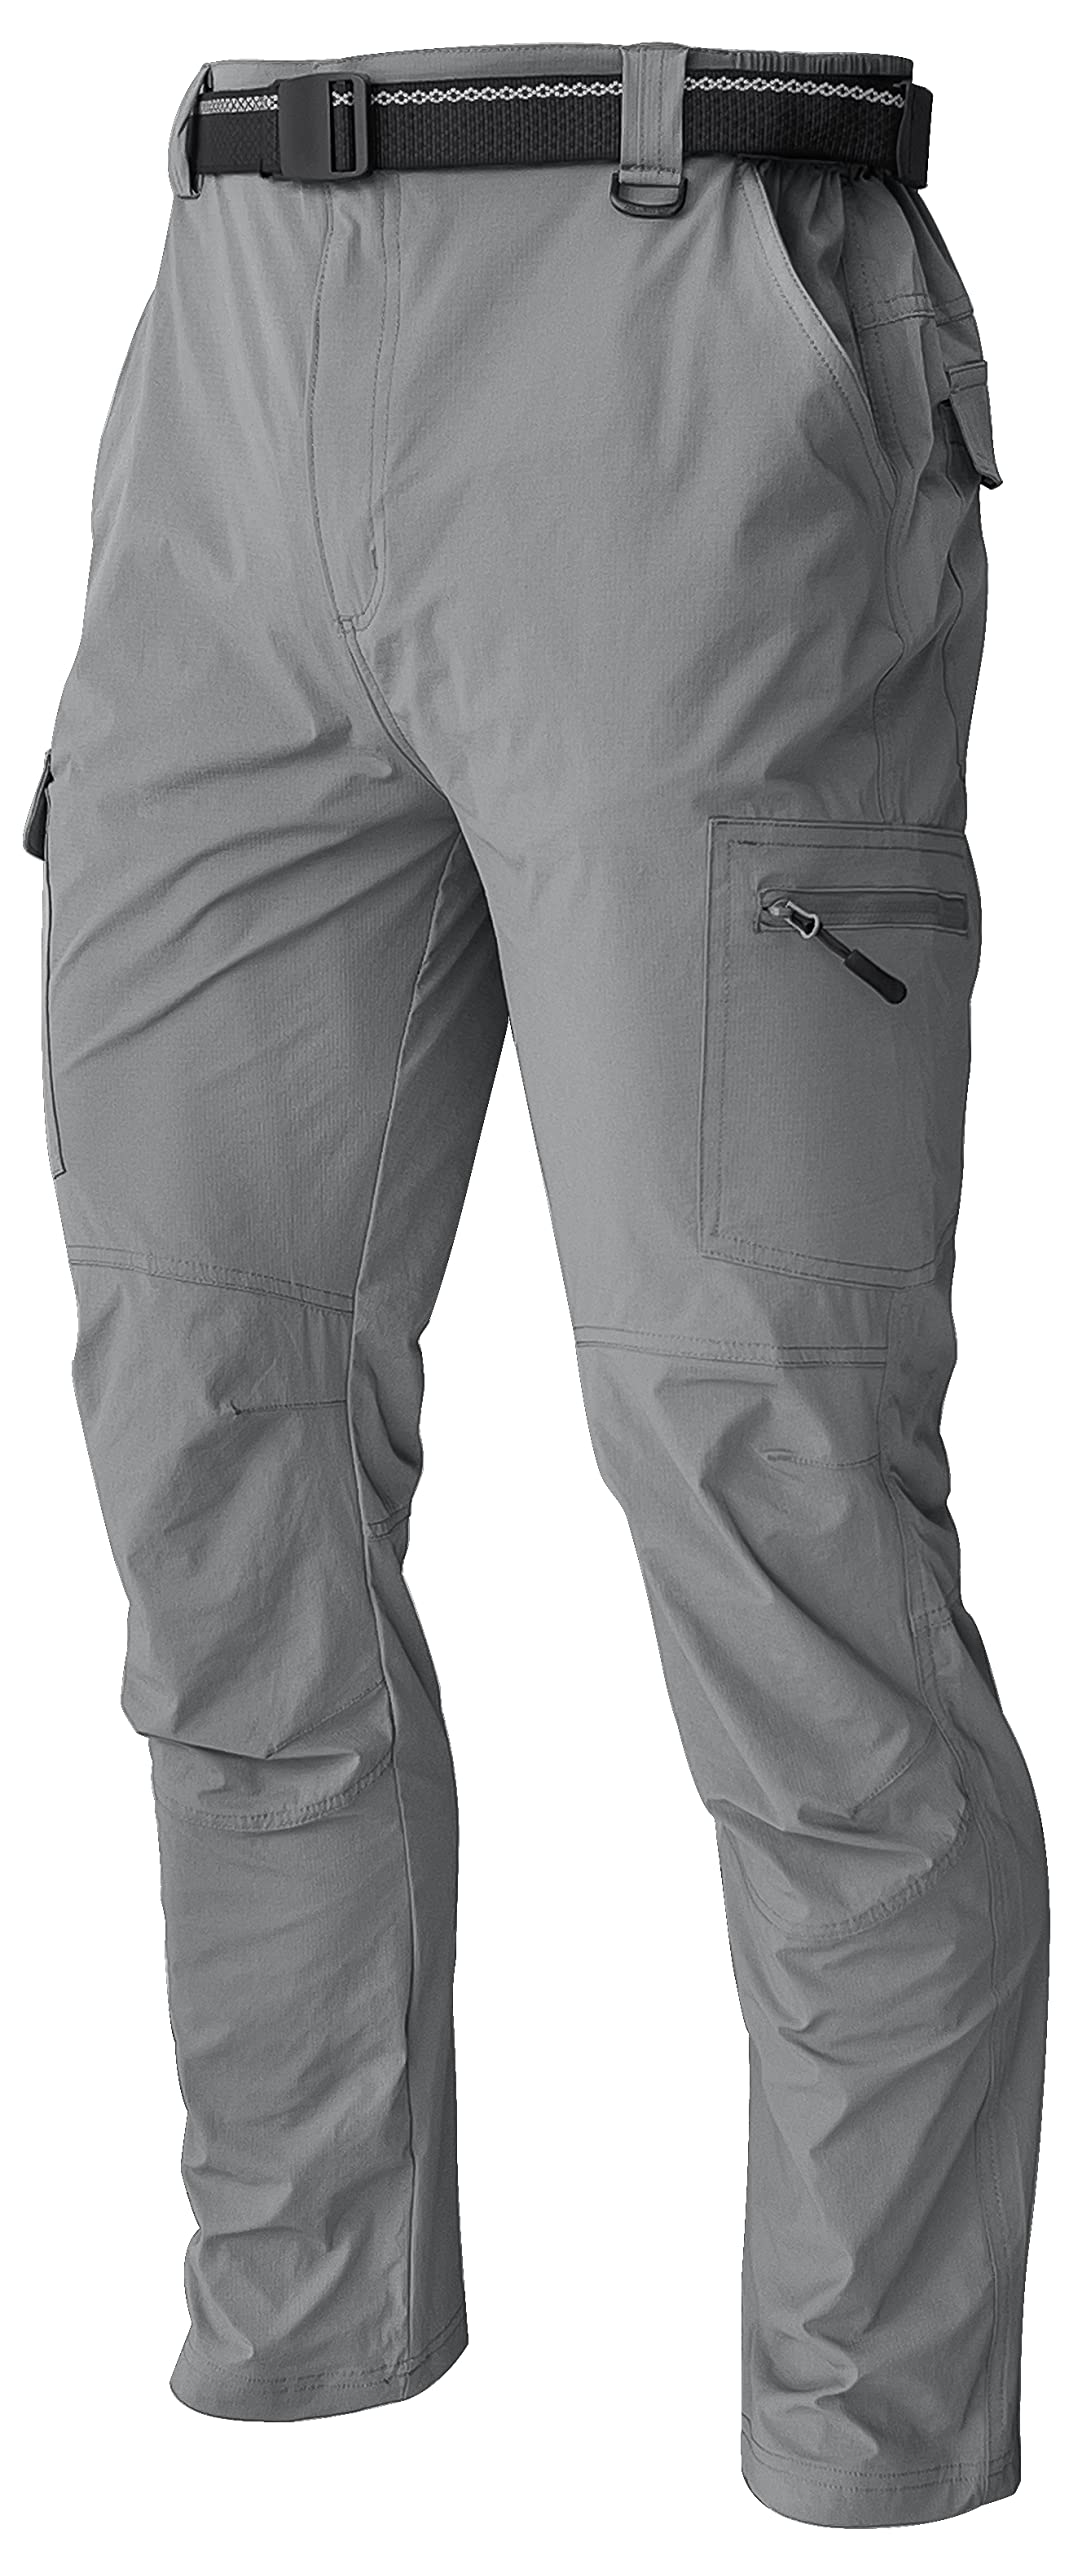 Trousers - Trekking M's Pants RECCO - Tatonka | Backpacks, Tents,  Outdoor-Equipment and Functional Clothing